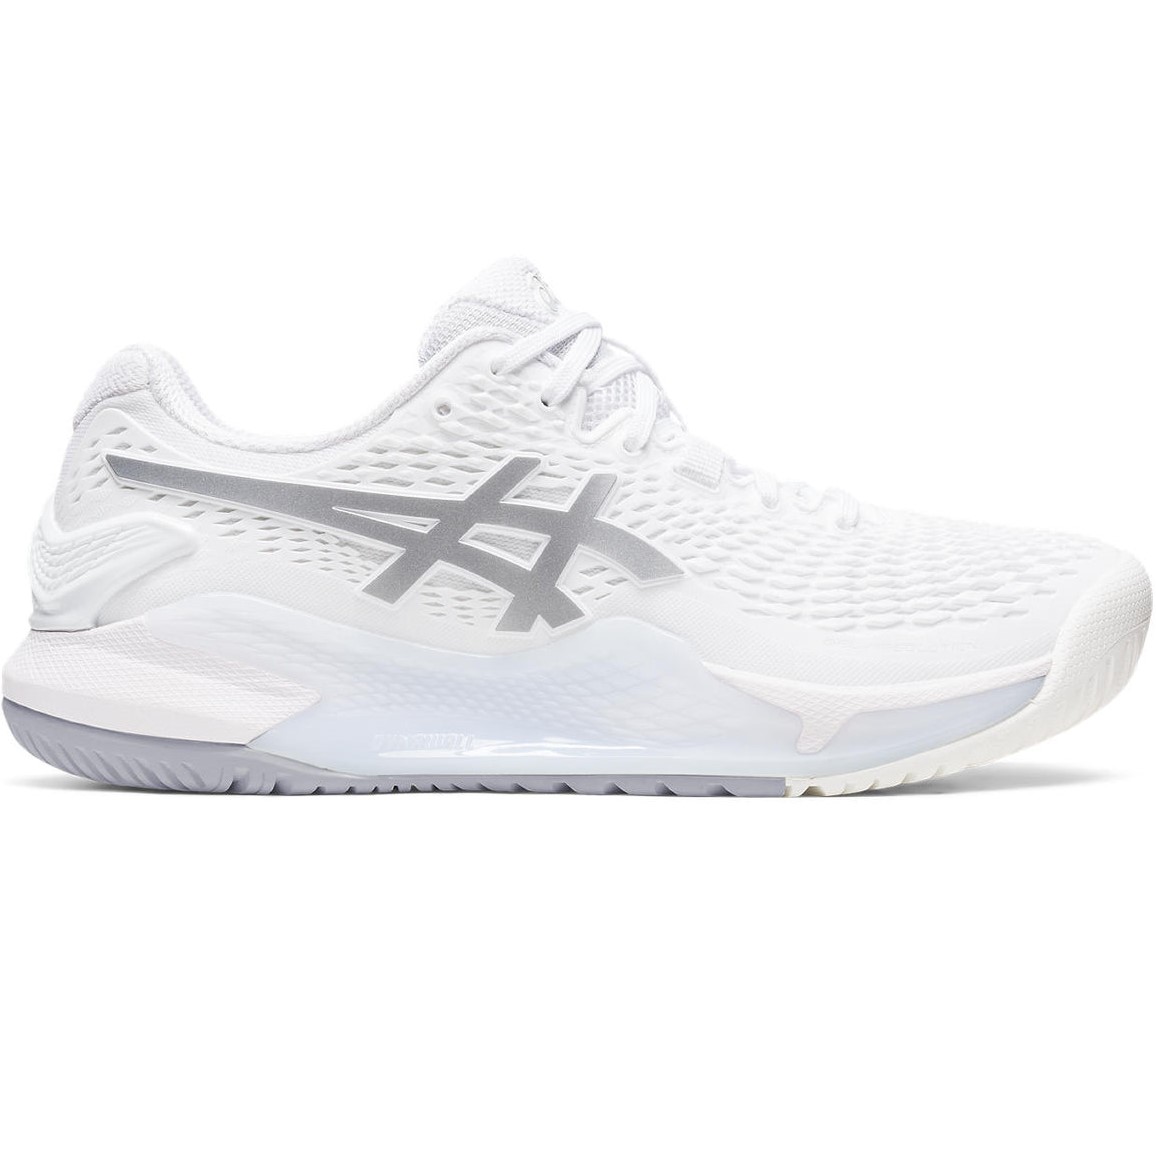 GIÀY ASICS NỮ GEL-RESOLUTION 9 WOMENS TENNIS SHOES WHITE PURE SILVER 1042A208-100 6